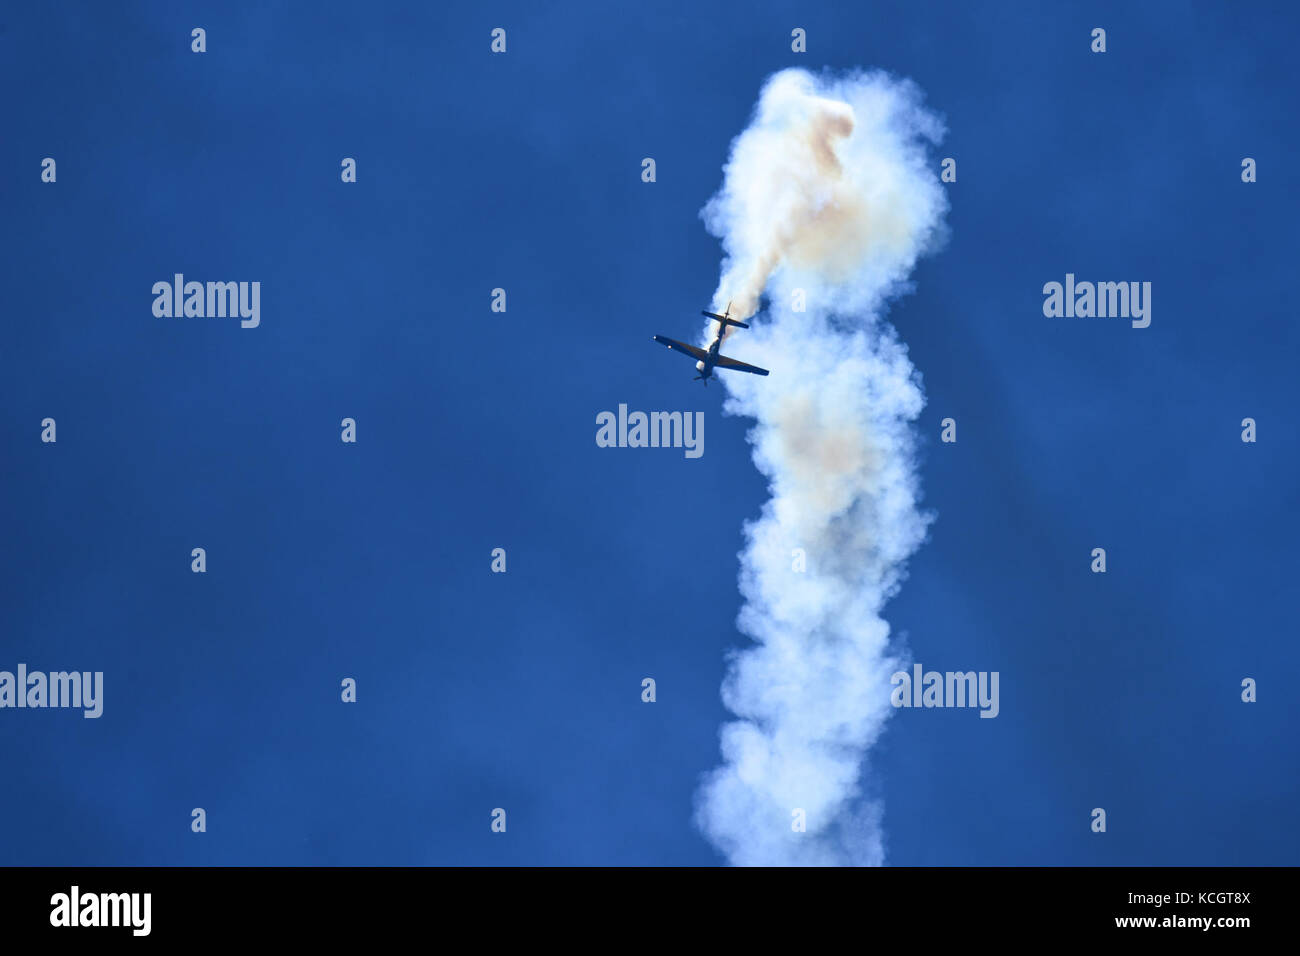 The Brazilian Air Force’s Smoke Squadron participates in Feria Aeronautica Internacional—Colombia 2017 at José María Córdova International Airport in Rionegro, Colombia, July 13, 2017. The United States Air Force is participating in the four-day air show with two South Carolina Air National Guard F-16s as static displays, plus static displays of a KC-135, KC-10, along with an F-16 aerial demonstration by the Air Combat Command’s Viper East Demo Team.United States military participation in the air show provides an opportunity to strengthen our military-to-military relationships with regional pa Stock Photo